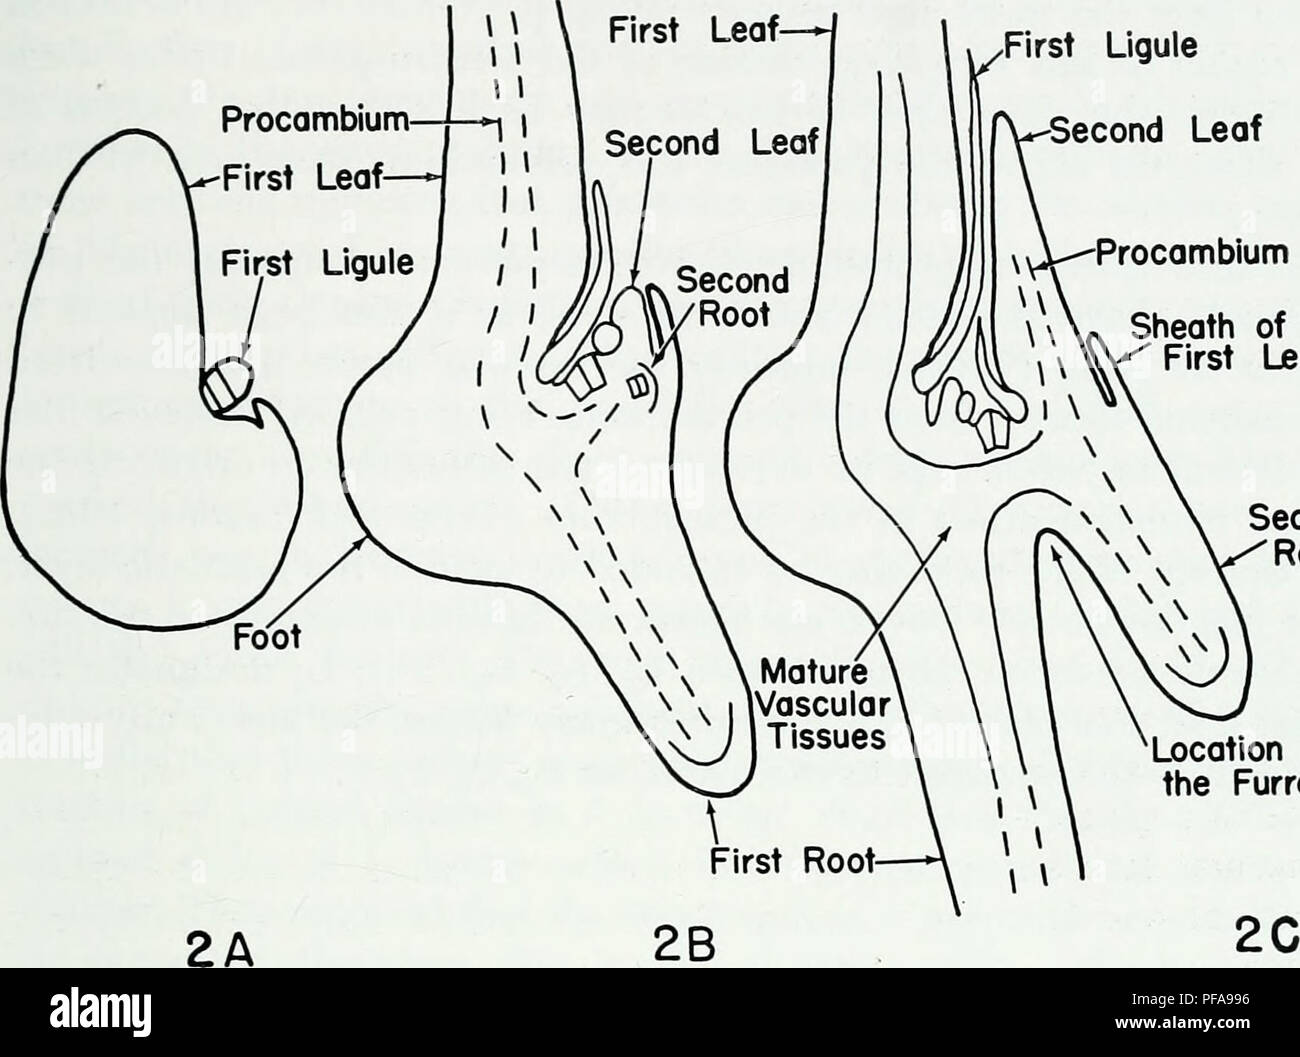 . The developmental anatomy of Isoetes. Isoetes; Botany. TERMINOLOGY First Ligule. Second Leaf ^y&gt;—Procambium   « Sheath of the &quot; First Leaf Second Root Location of the Furrow Fig. 2. Three stages in the development of a young sporophyte. A. One leaf. B. Two leaves. C. Three leaves. The plane of sectioning in A, B, C is the same plane that contains all the leaf traces while the plant is in a ¥2 phyllotaxy. The basal furrow forms between the first and second roots in a plane at right angles of the plane of sectioning of the figures. Schematic. TERMINOLOGY Parke (1959) had discussed t Stock Photo